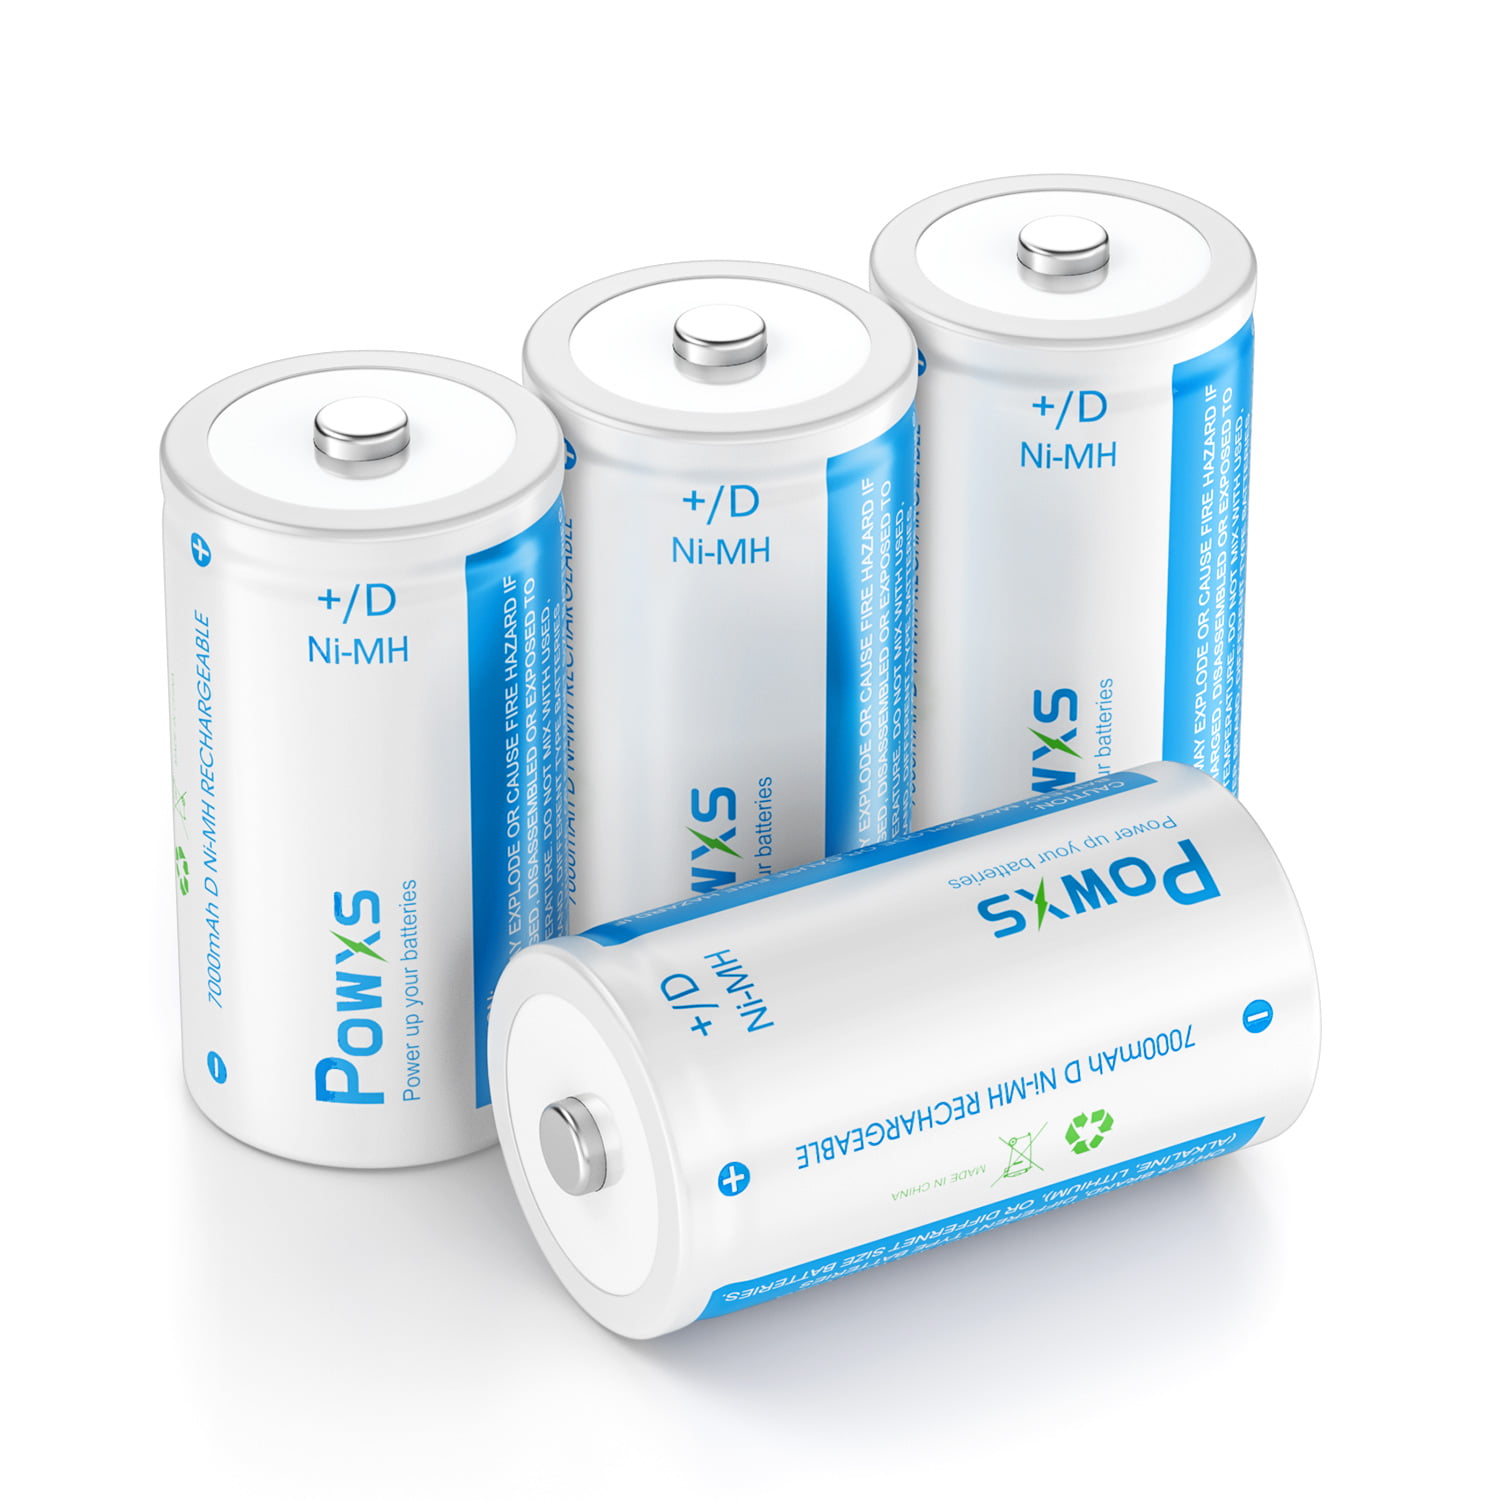 POWXS AA Rechargeable Batteries 2000mAh Pre-Charged 1.2 Volt Ni-MH Low Self-Discharge AA Batteries 8 Pack